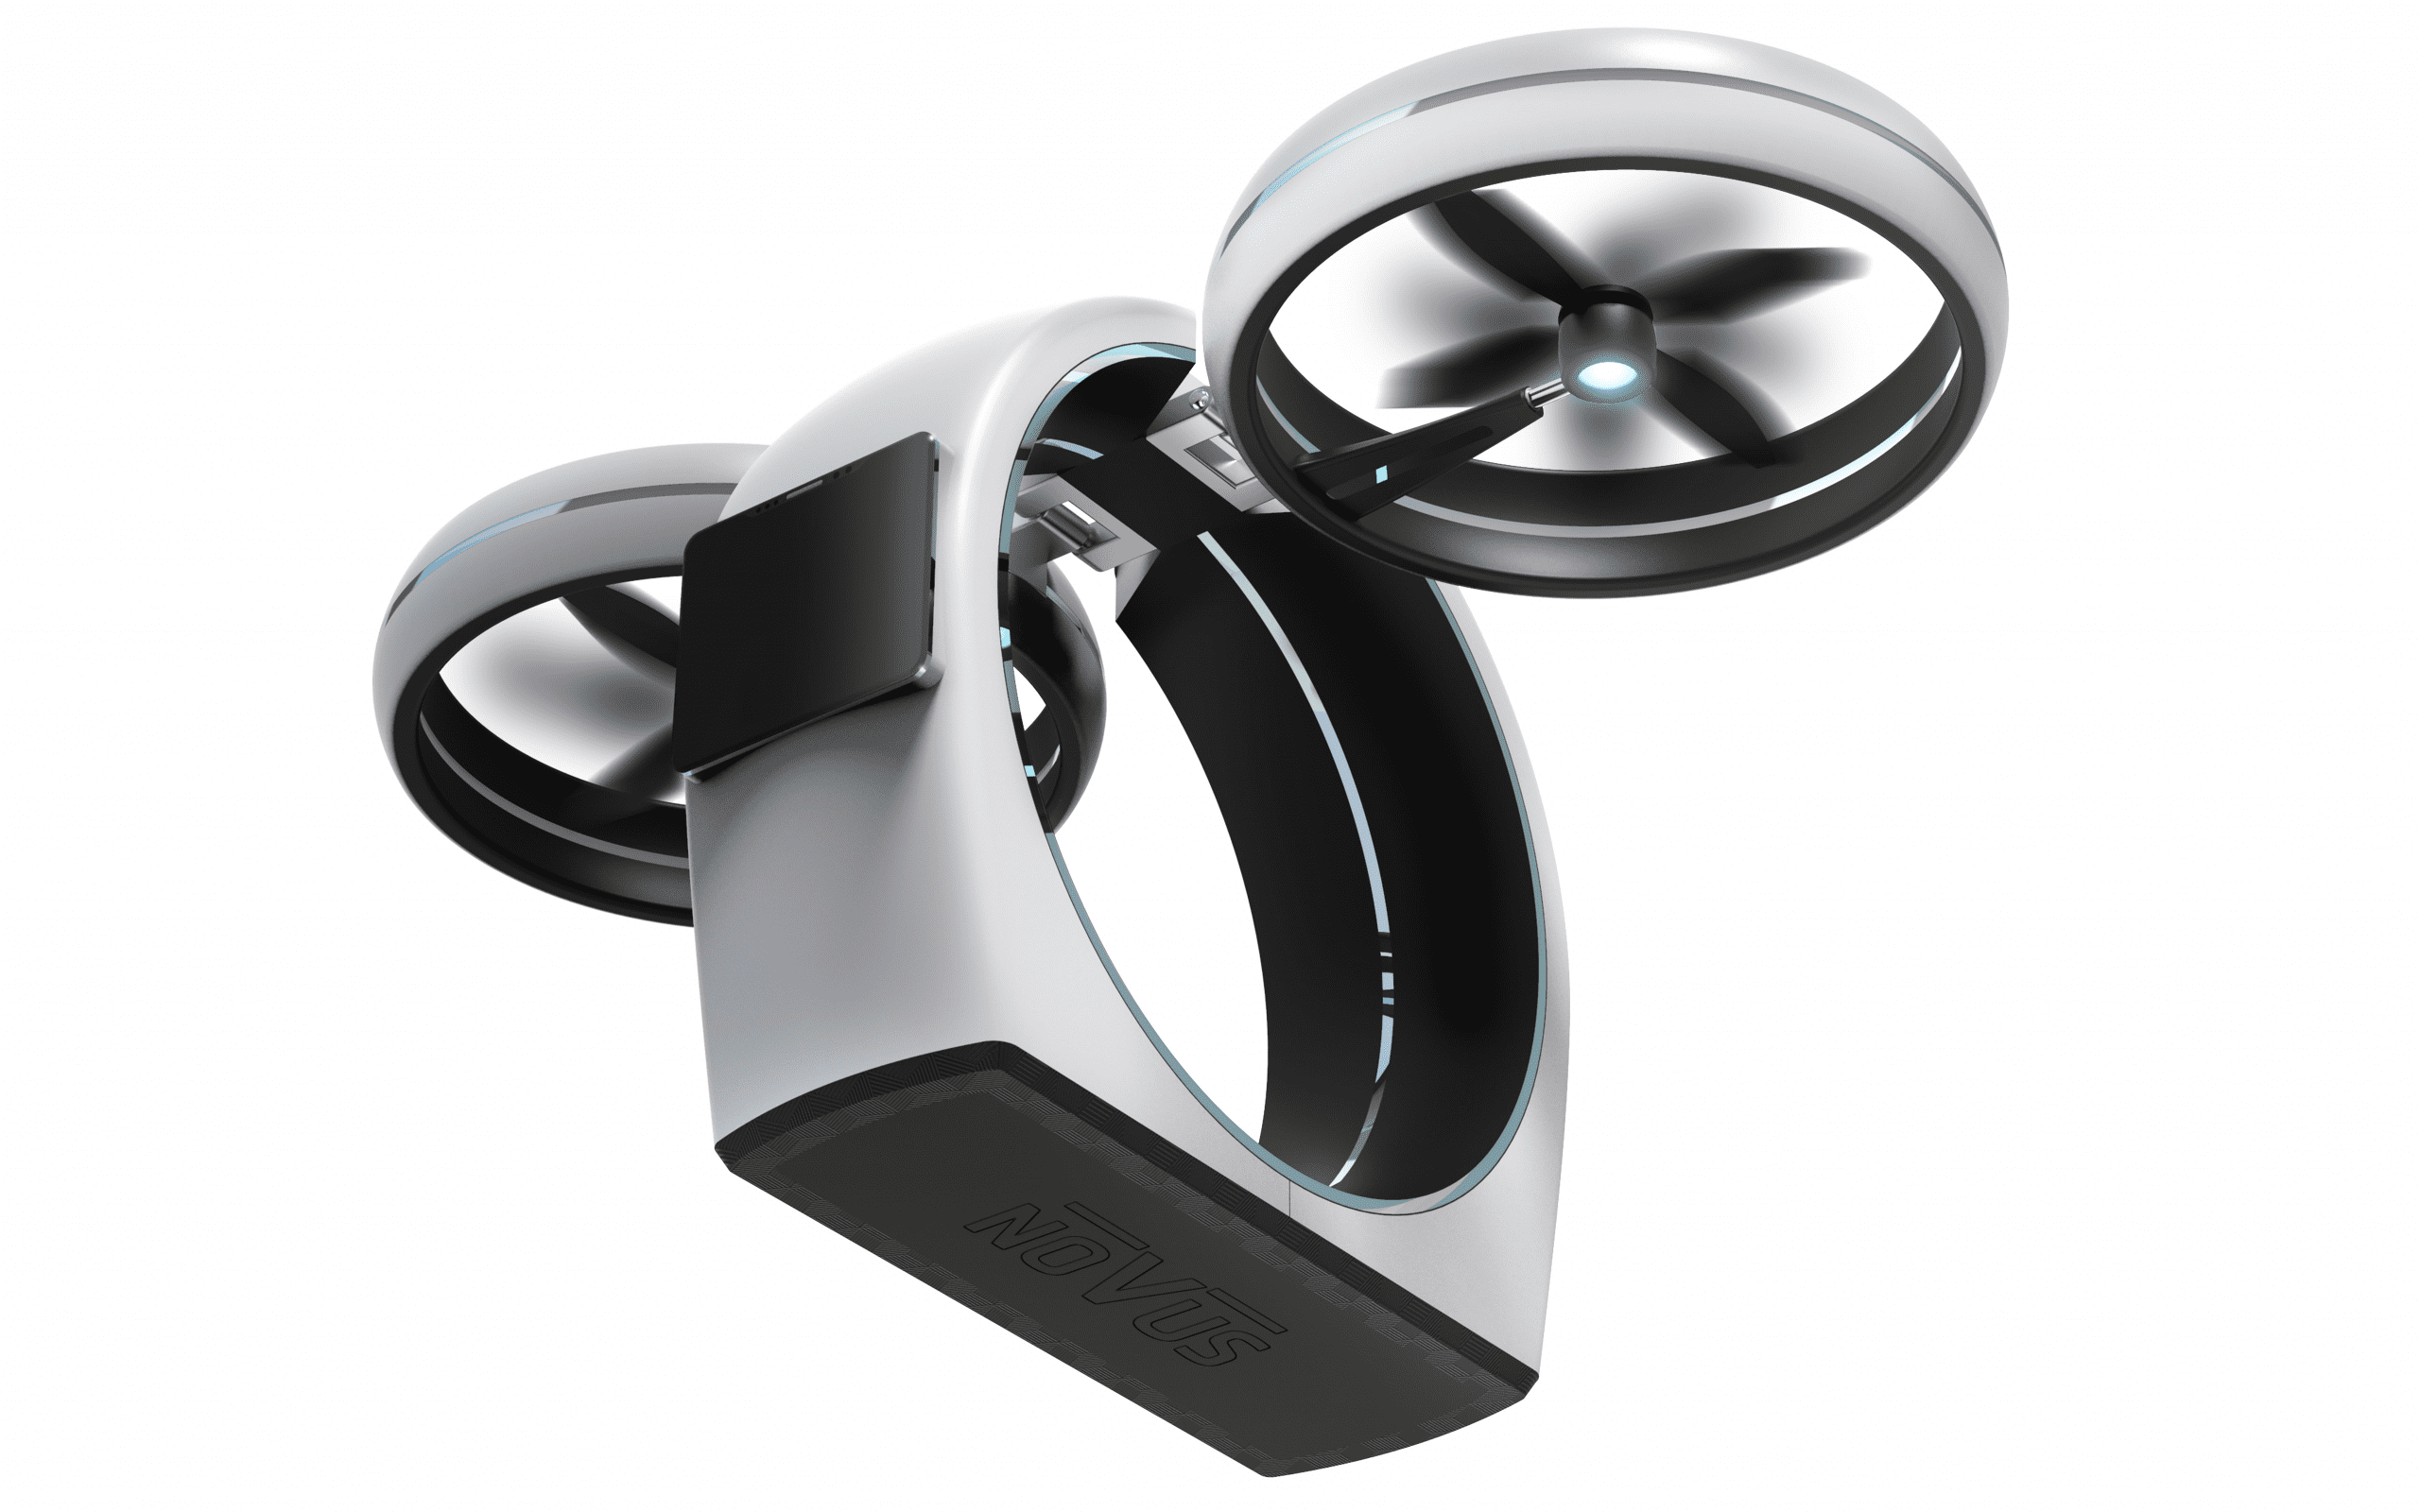 Digital image of a ring-shaped white drone on a white background. The flat bottom and inside of the ring are black. The drone has two black spinning propellers surrounded by white ring-shaped panels. The center of the propellers have glowing blue lights.